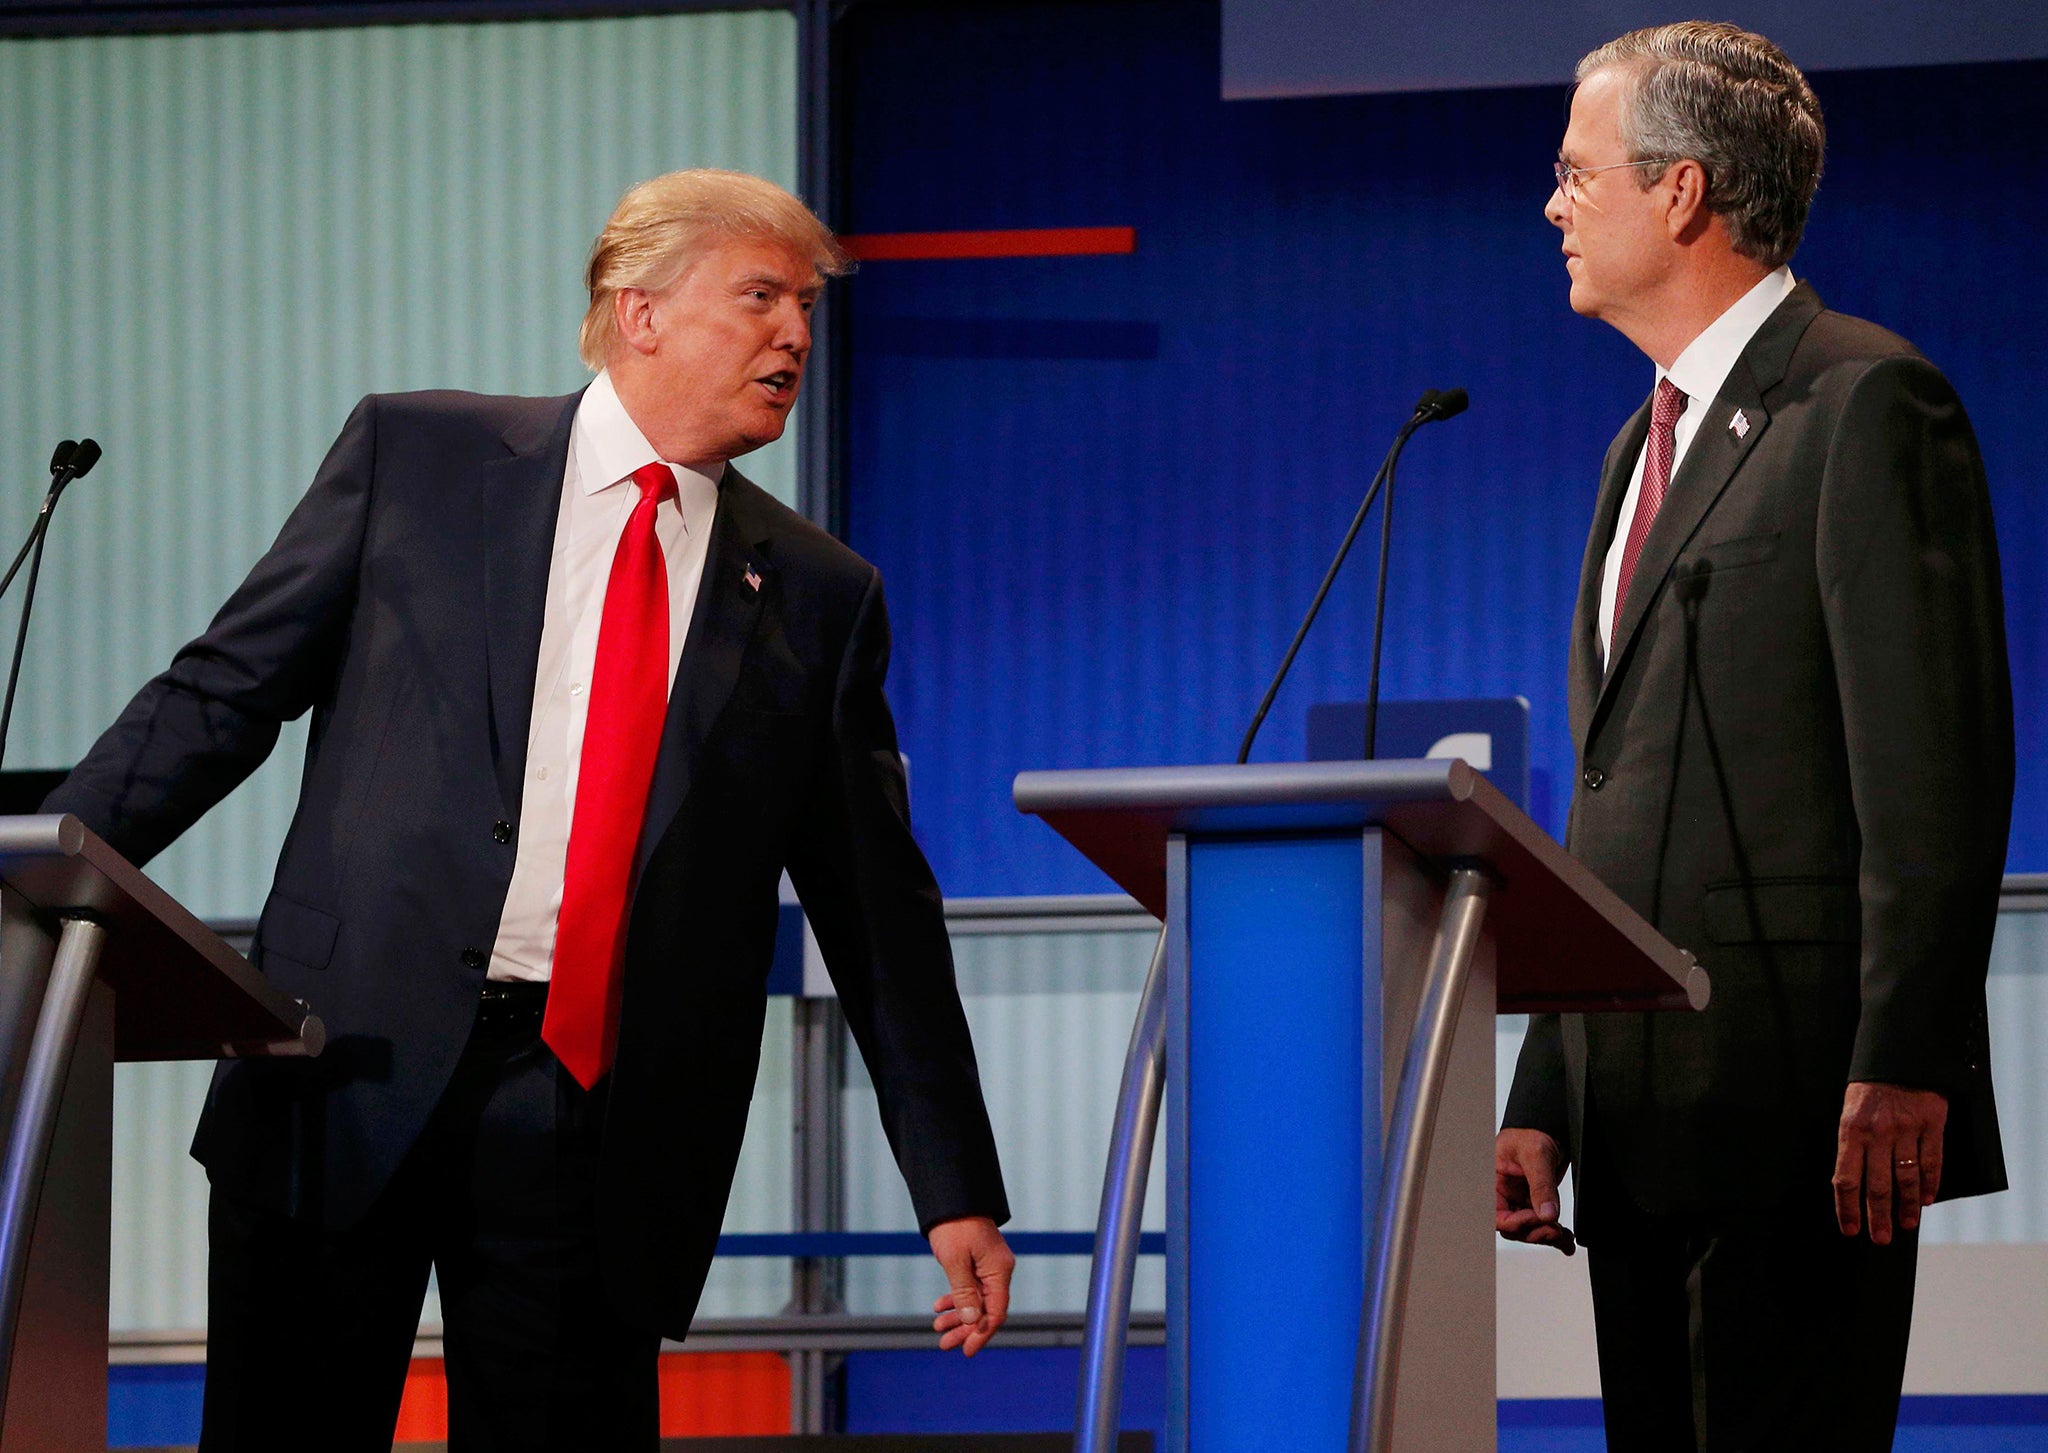 Republican 2016 U.S. presidential candidate businessman Donald Trump (L) talks with fellow candidate and former Governor of Florida Jeb Bush during a commercial break at the first official Republican presidential candidates debate of the 2016 U.S. preside